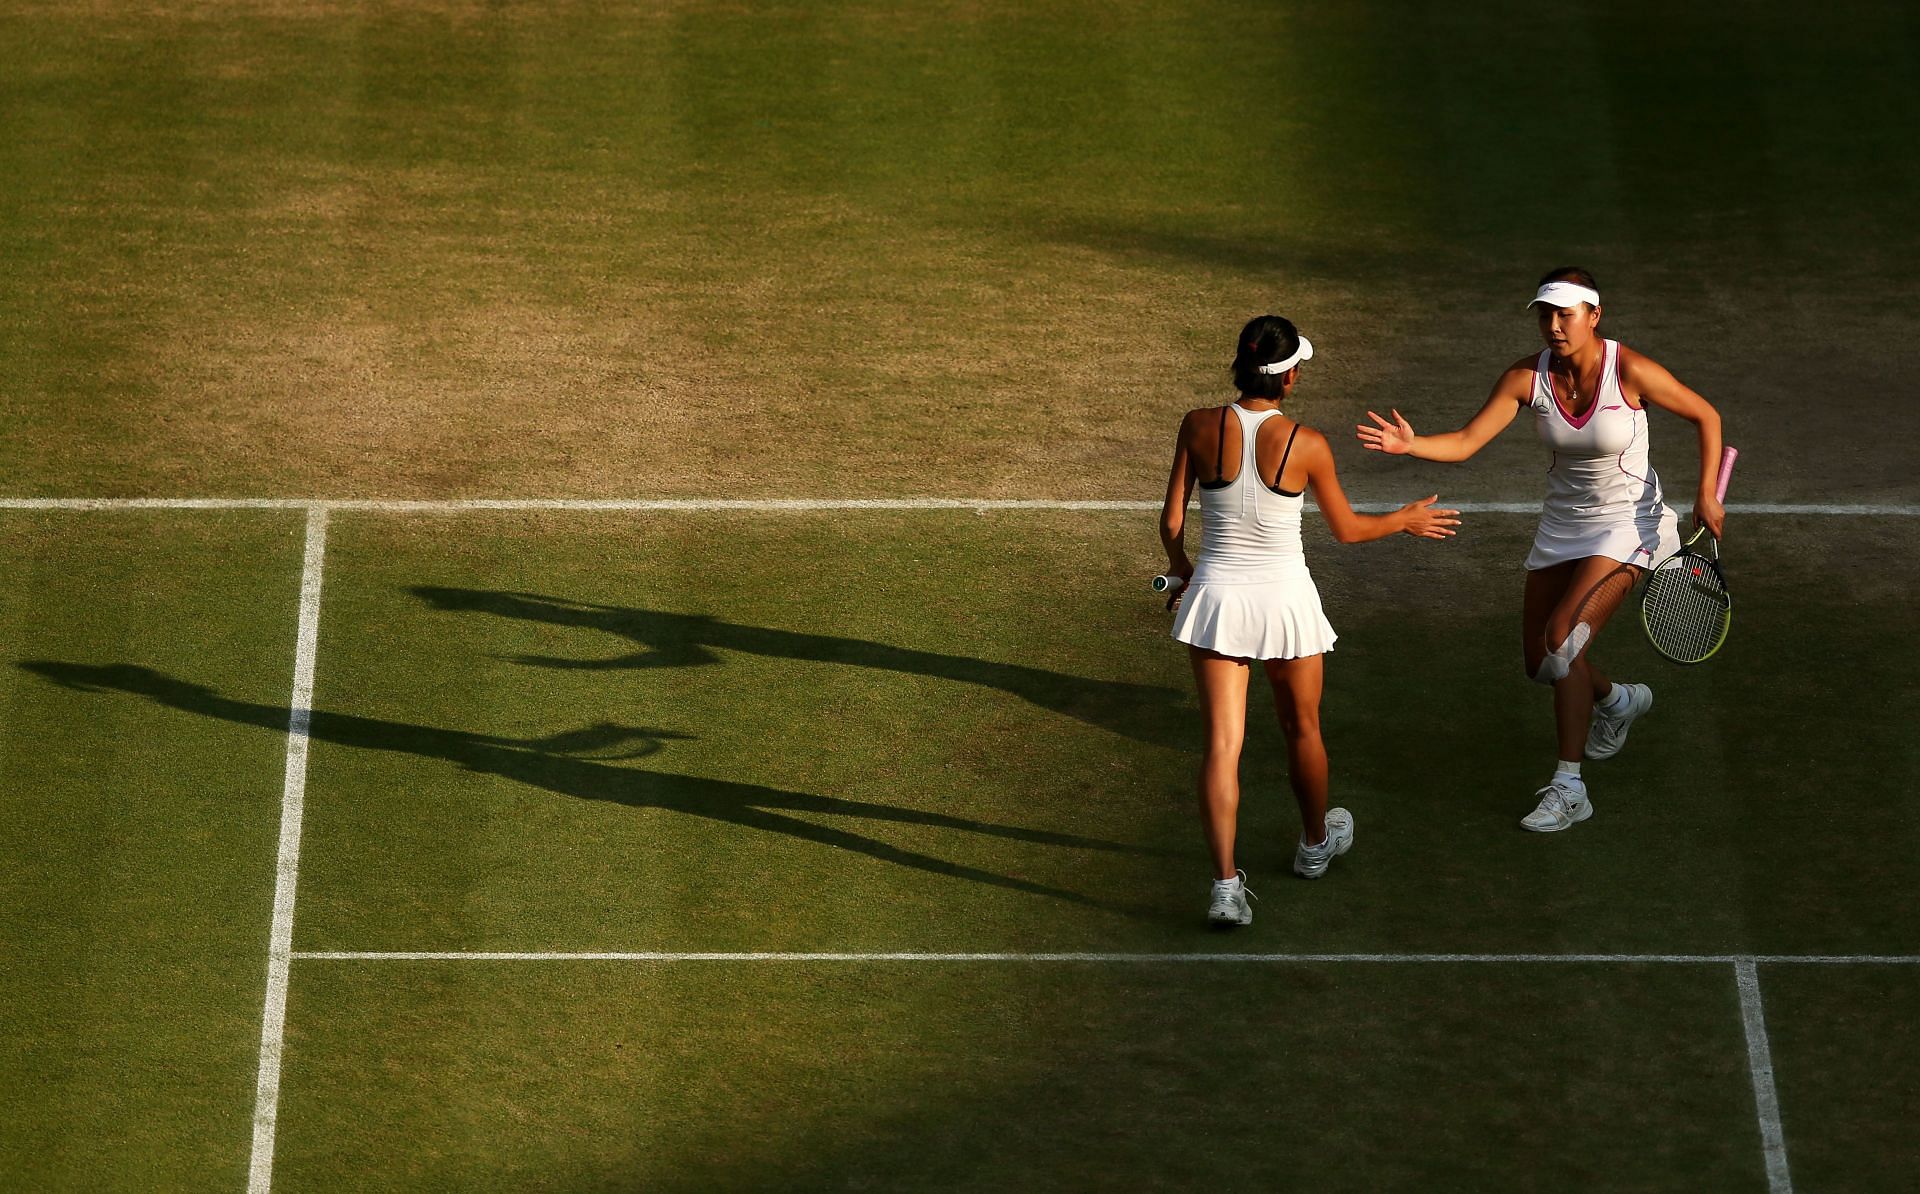 Peng Shuai (R) has not made any public appearances since coming forward with her allegations.